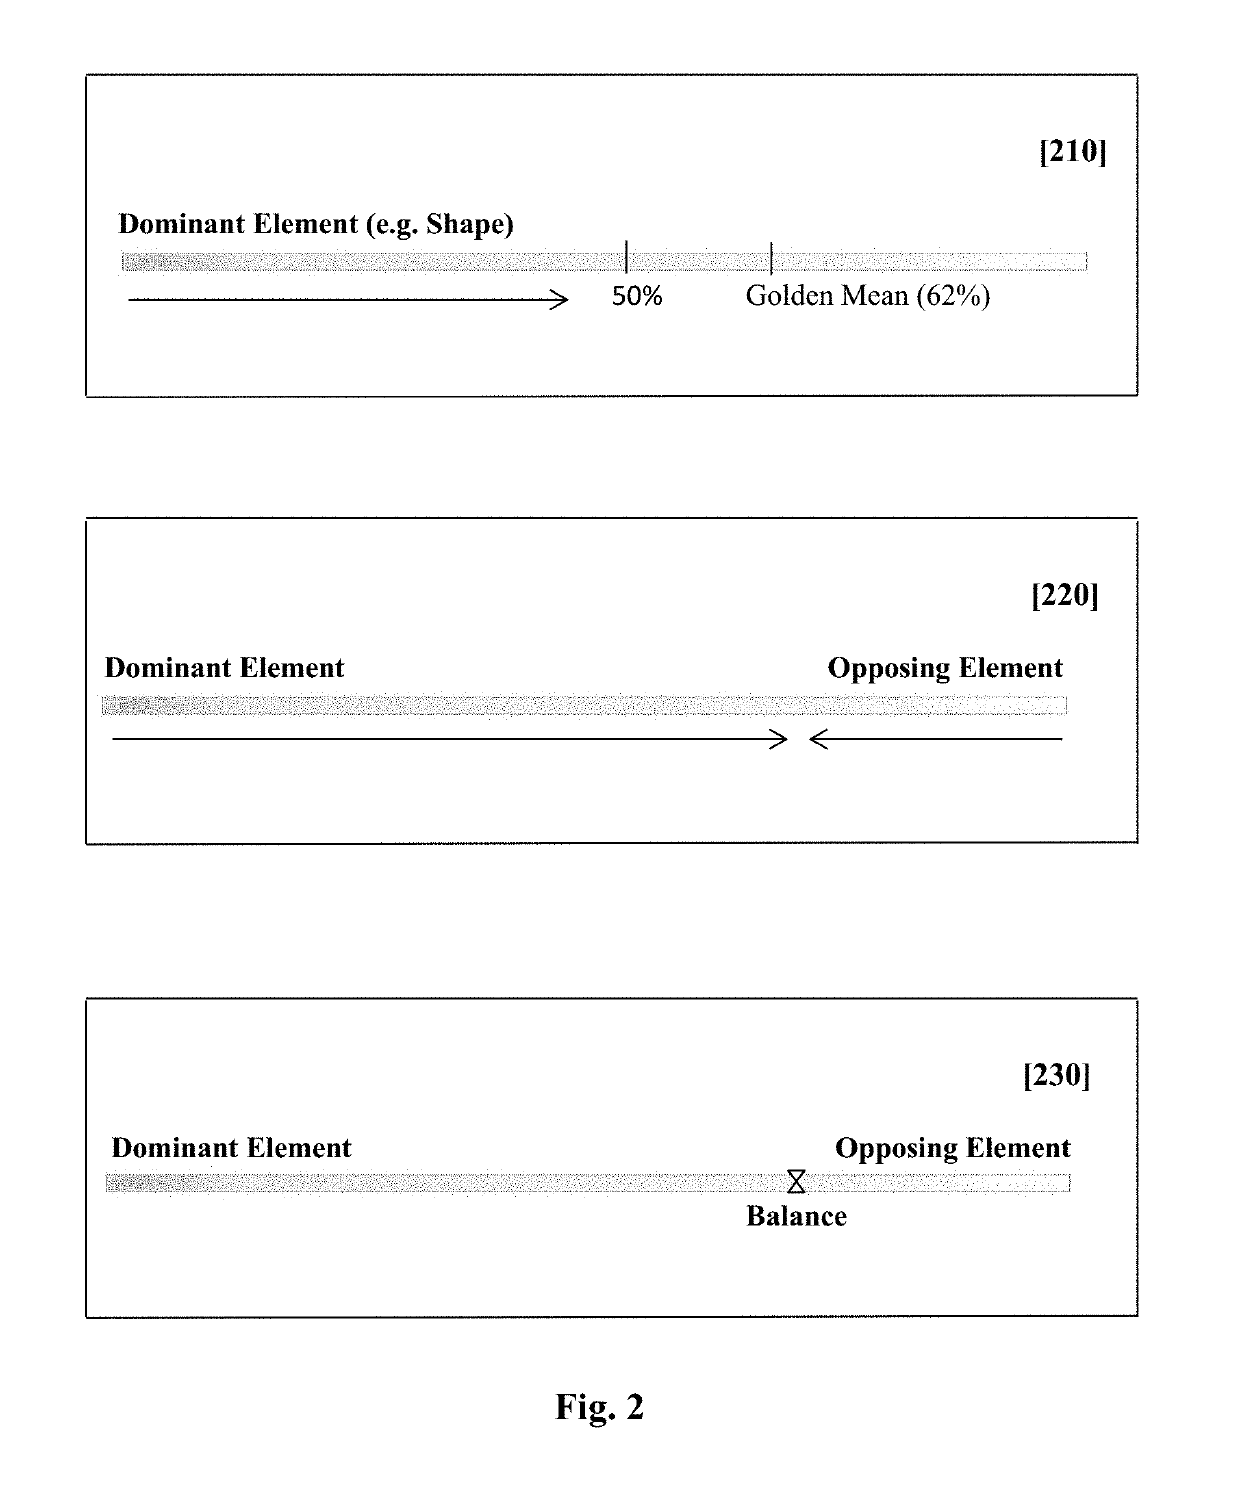 Method for evaluating a visual design and identifying changes which will improve visual harmony